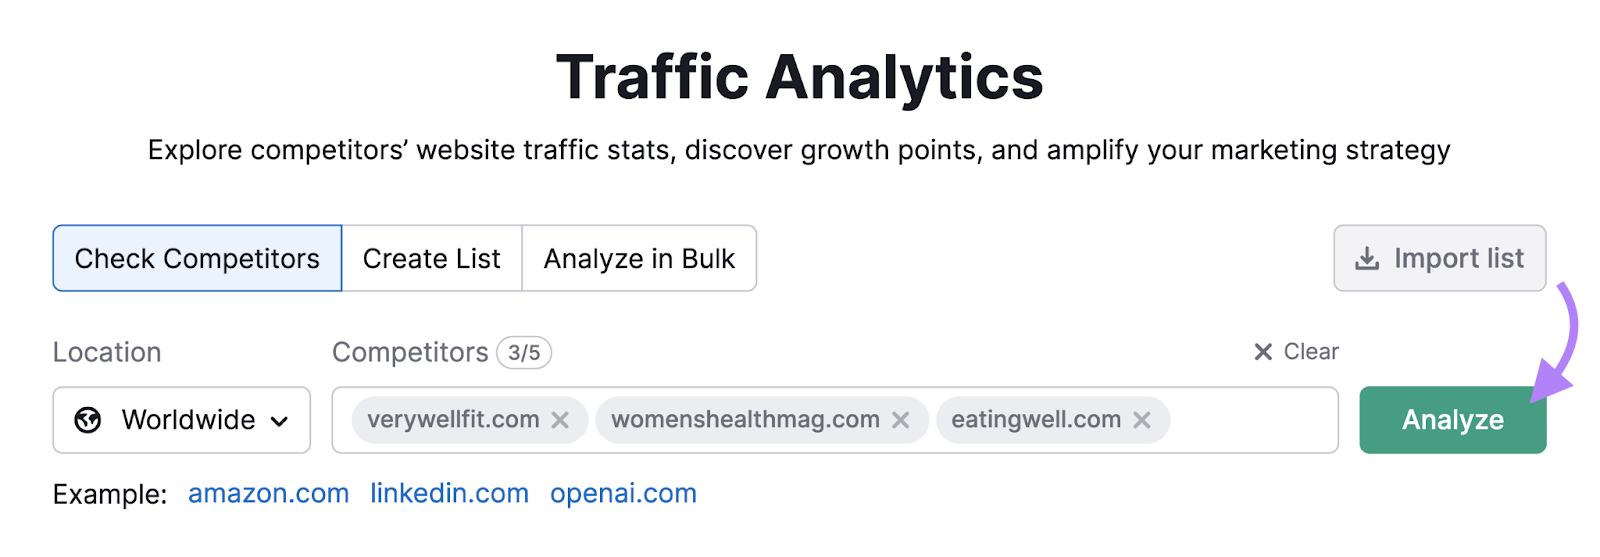 search for three competitors in traffic analytics tool